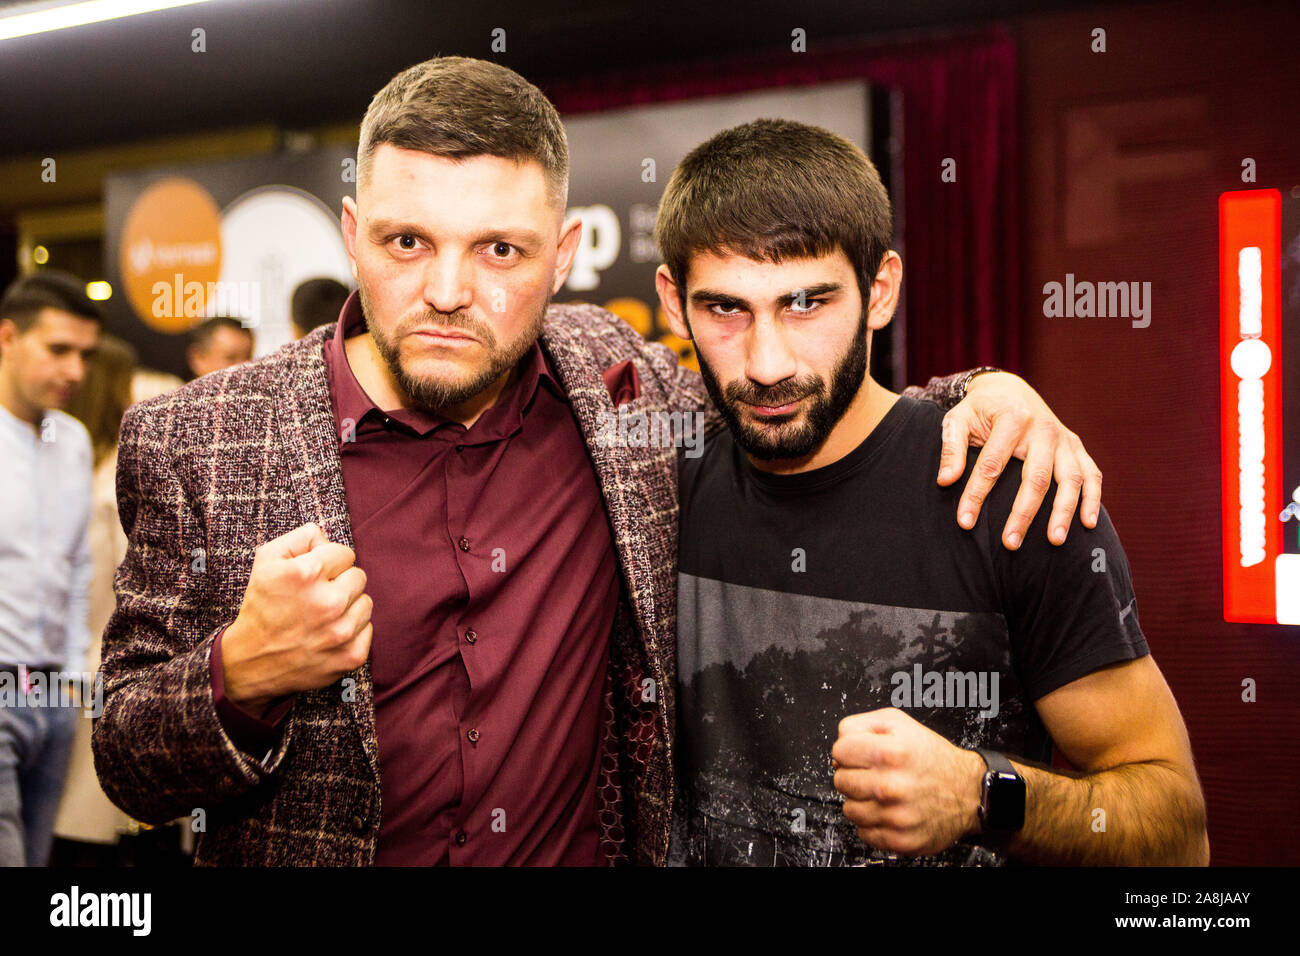 Two friends professional ring announcer and boxer hug and joke at White Collars amature boxing ring card 1 Nov 2019 in Kiev Freedom Hall after fights. Stock Photo